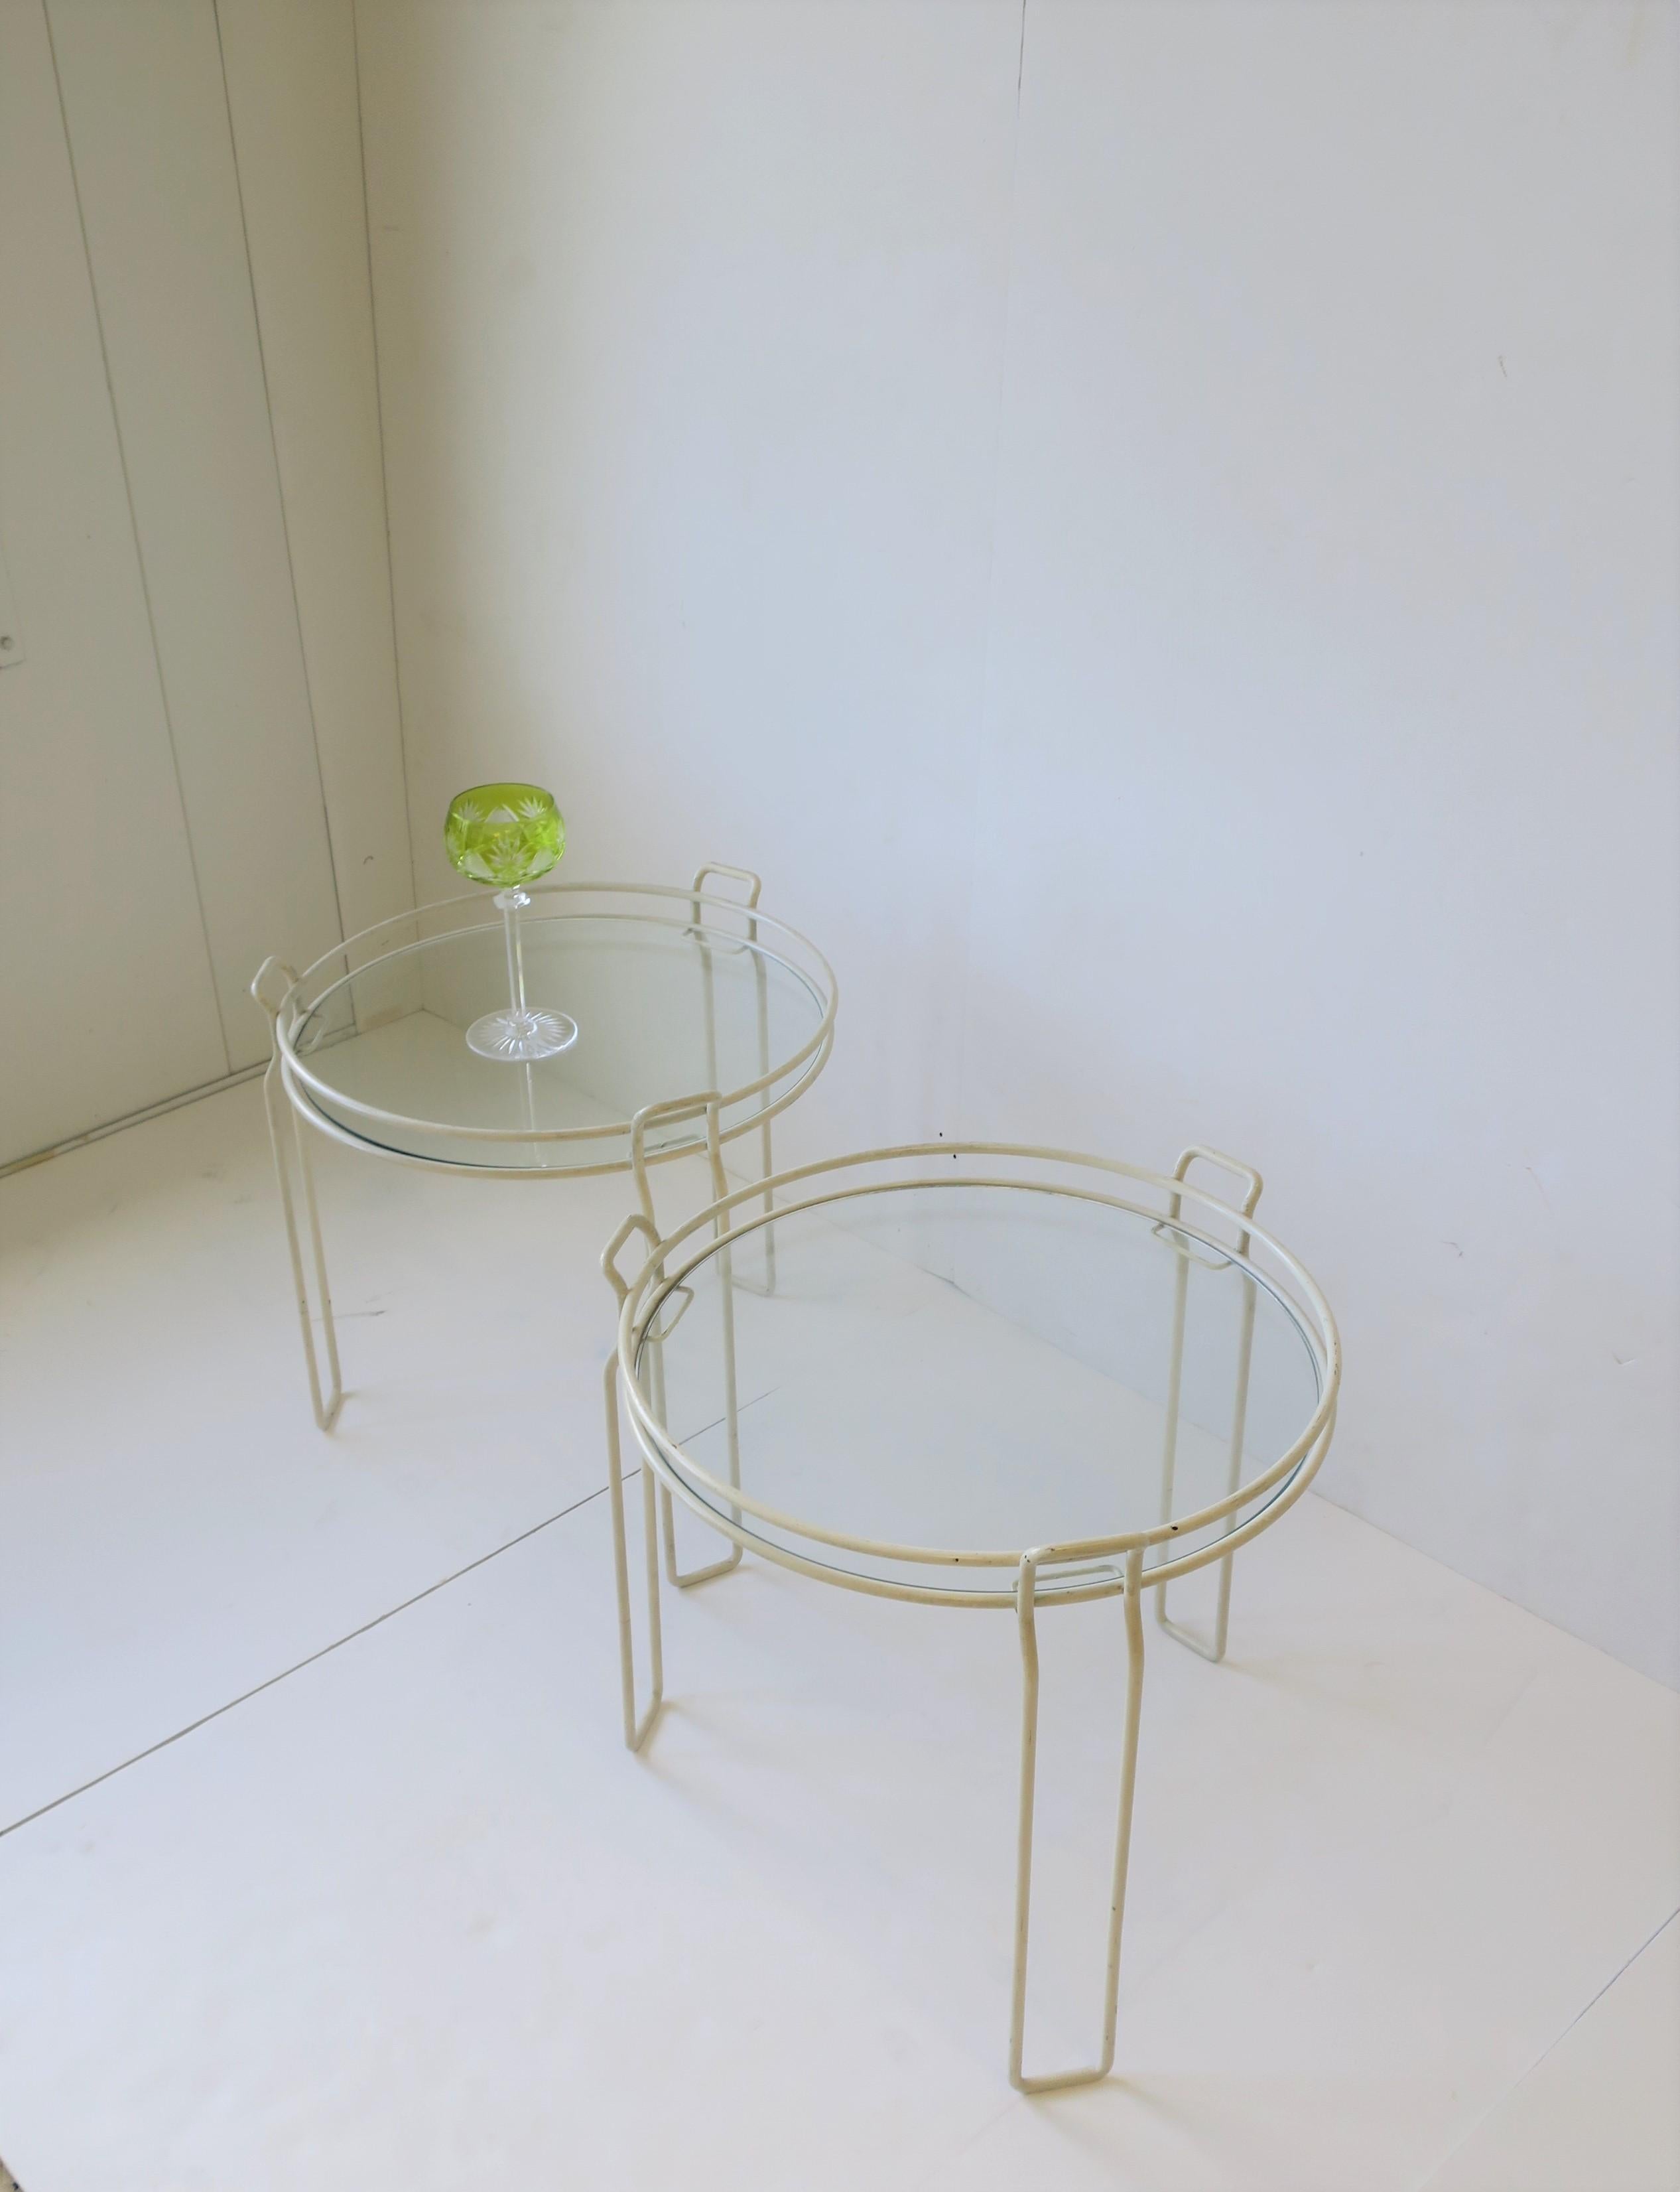 Midcentury Modern White Side Drinks Nesting or Stacking Tables, Pair, 1960s In Good Condition For Sale In New York, NY